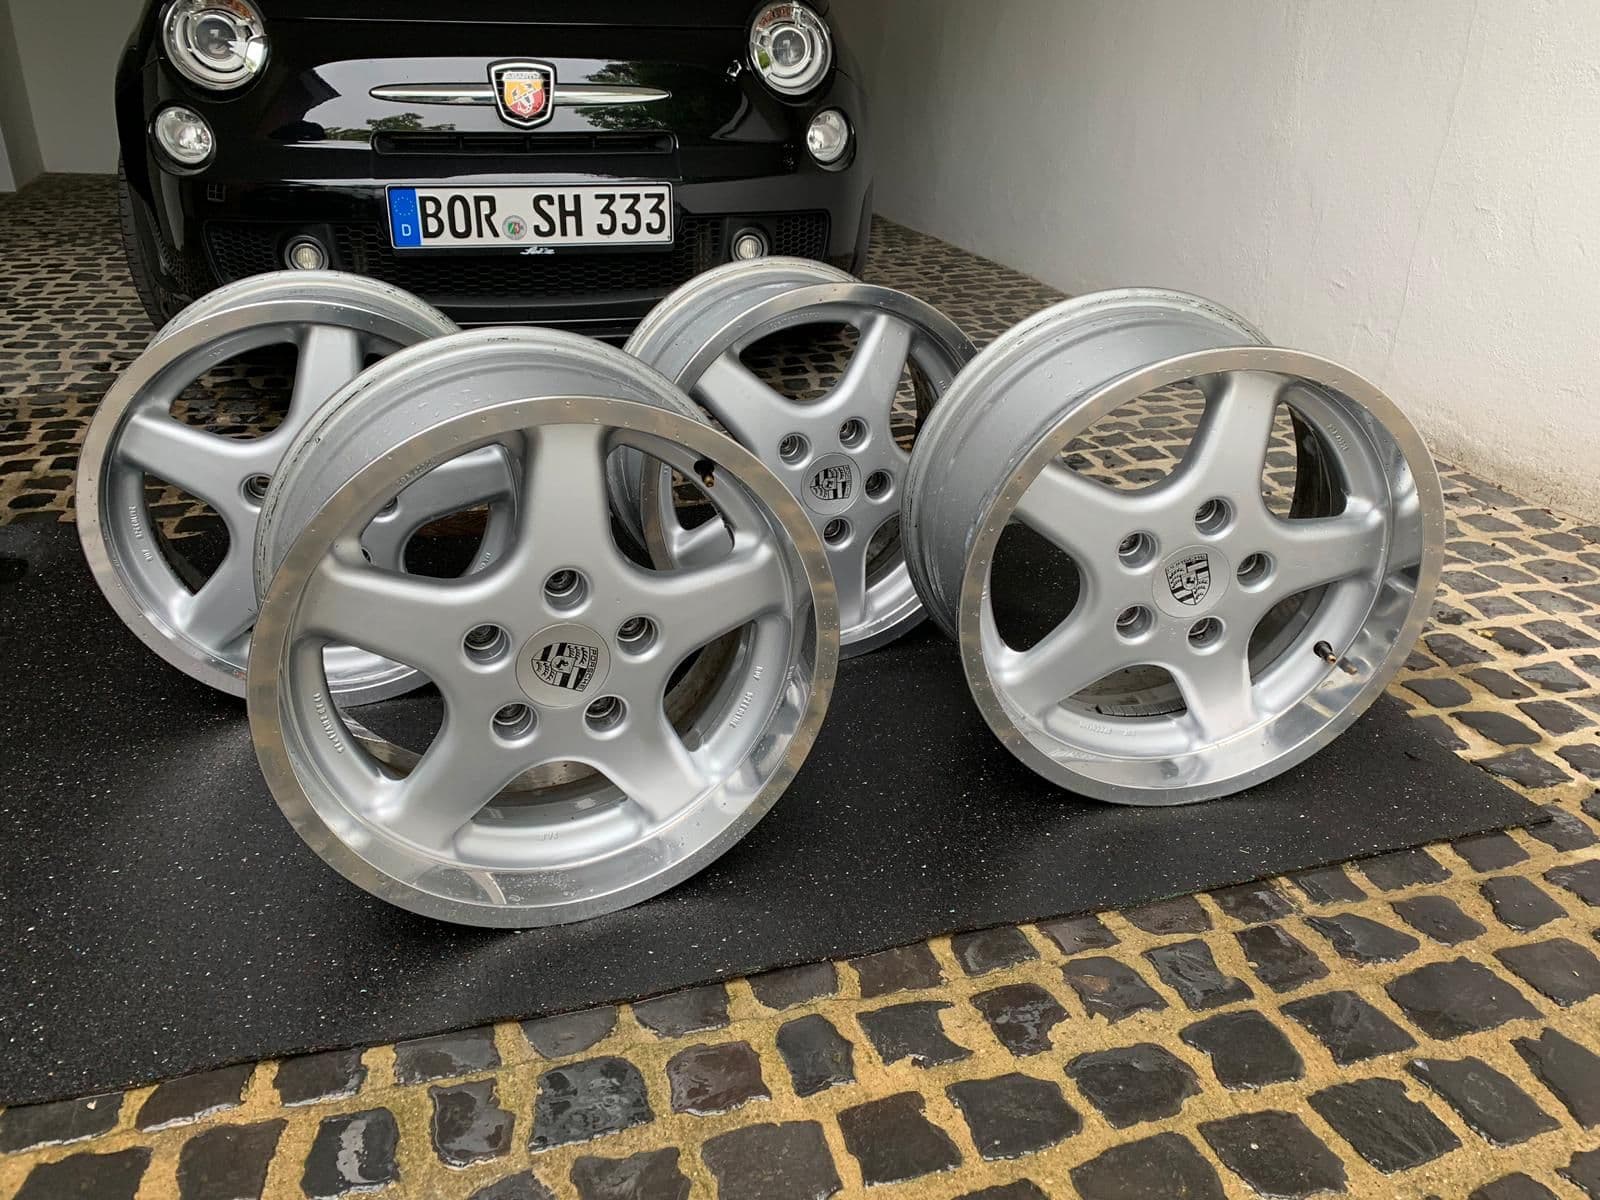 Wheels and Tires/Axles - For Sale - Genuine RUF wheels - 17x8" / 9" for Porsche 964 / 944 / 968 / 928 etc - Used - Longmont, CO 80501, United States